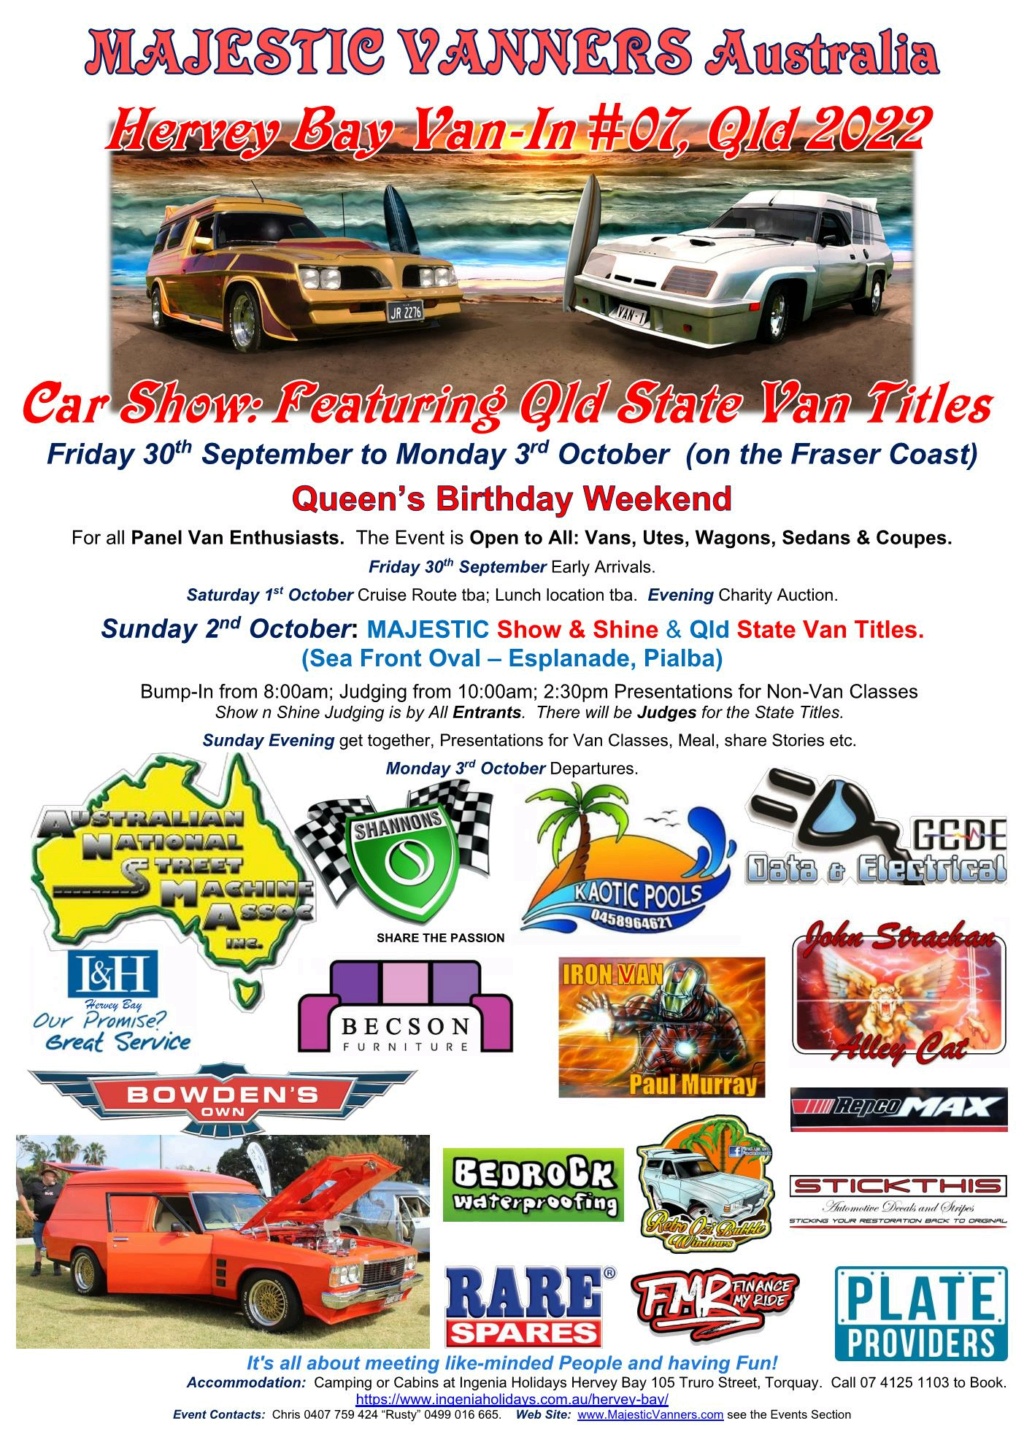 QLD State Van Titles 2022 & Van-In #07 Hervey Bay Friday 30th Sept - Monday 3rd October 2022 2022_h12